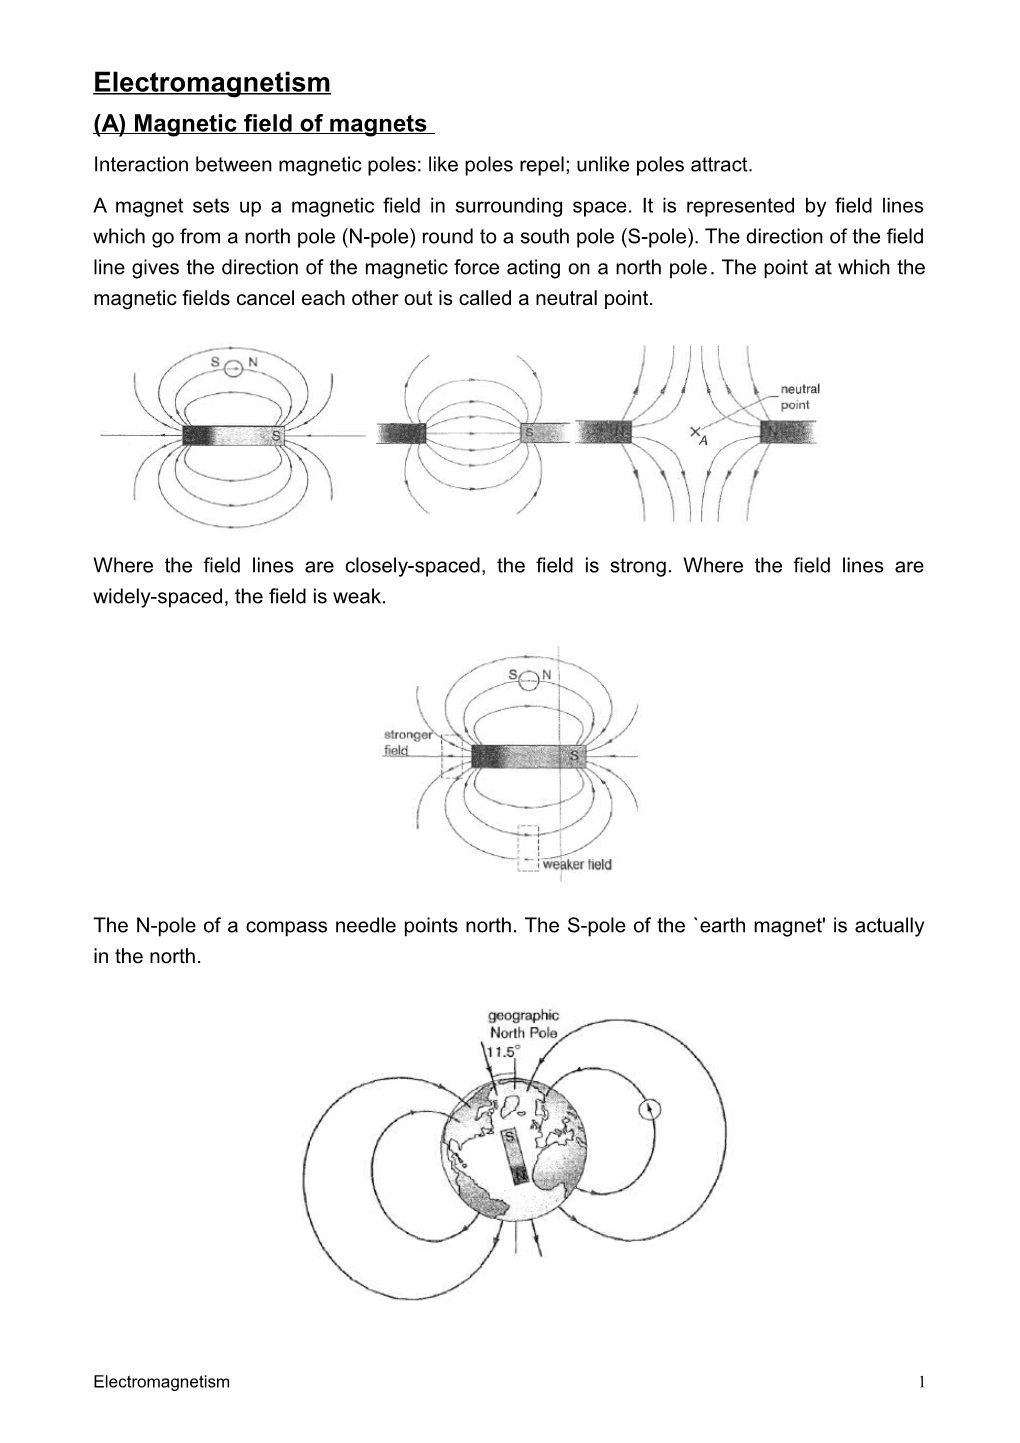 Magnetic Field of Magnets Interaction Between Magnetic Poles: Like Poles Repel; Unlike